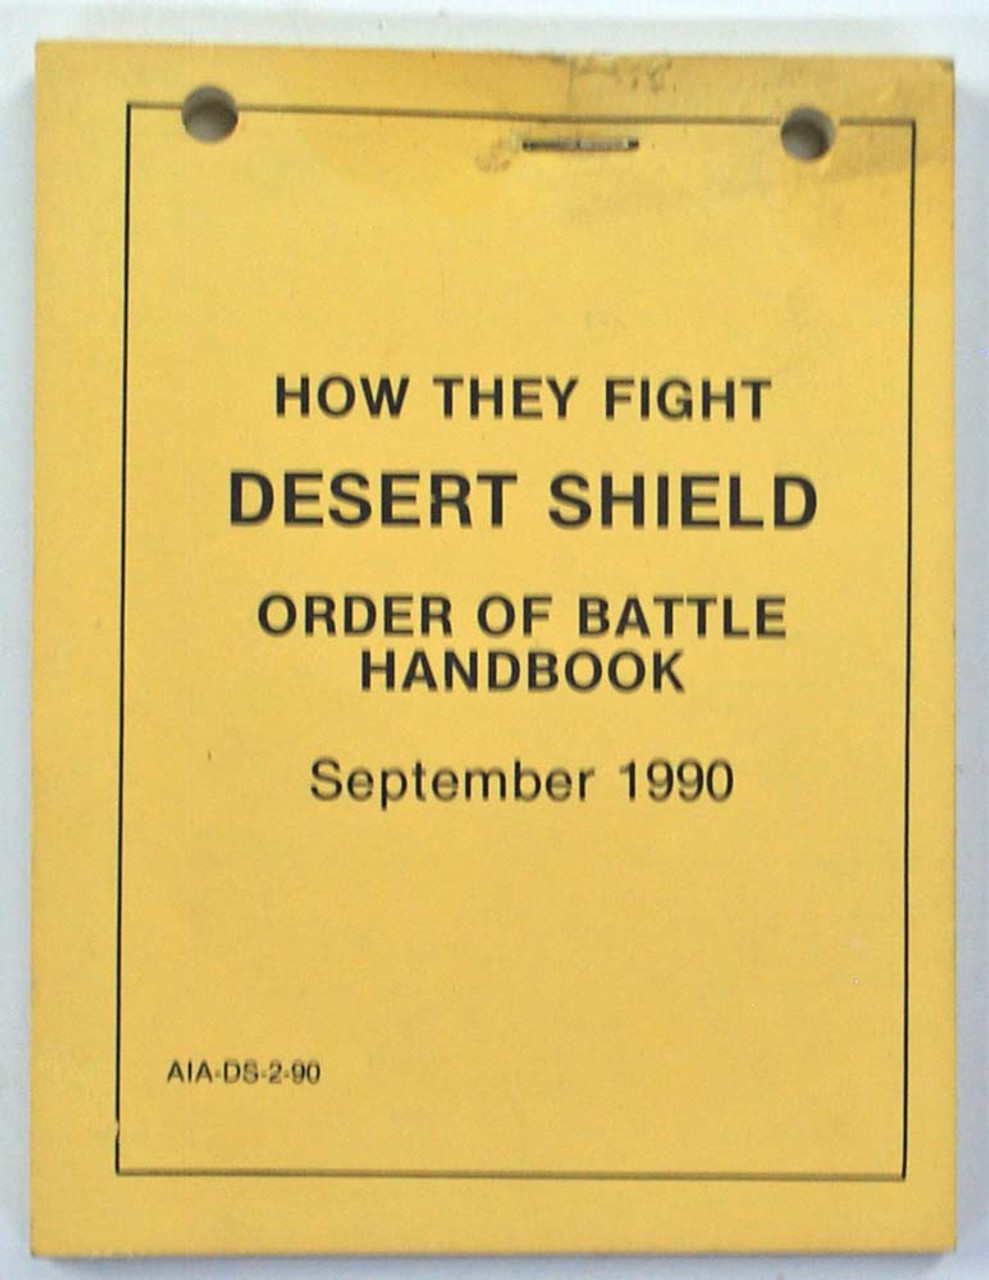 How They Fight DESERT SHIELD Order Of Battle Handbook – September 1990 (AIA-DS-2-90)